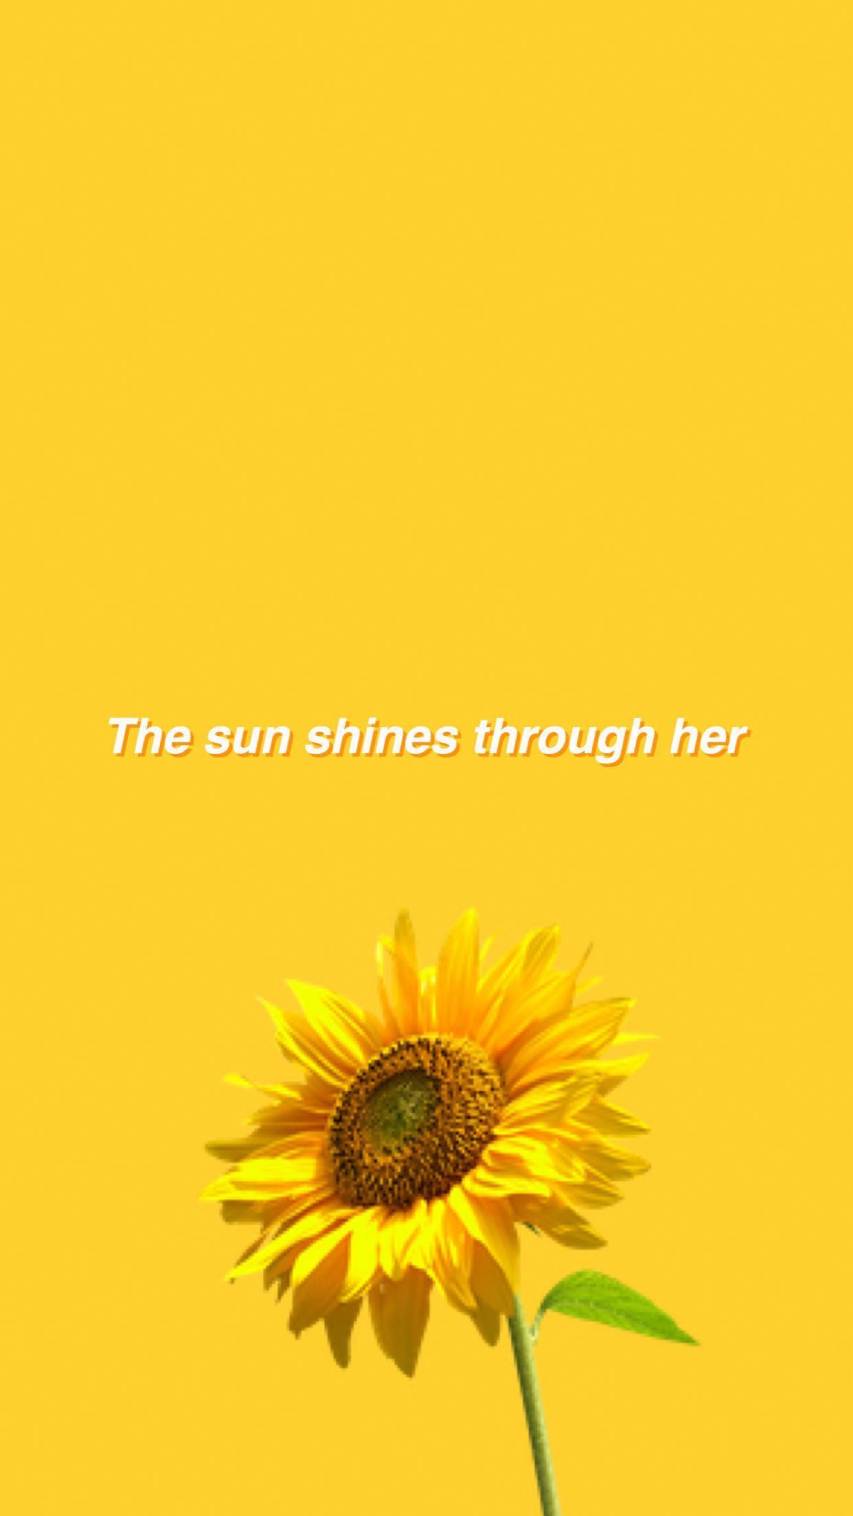 Super Aesthetic Sunflower Wallpapers for iPhone